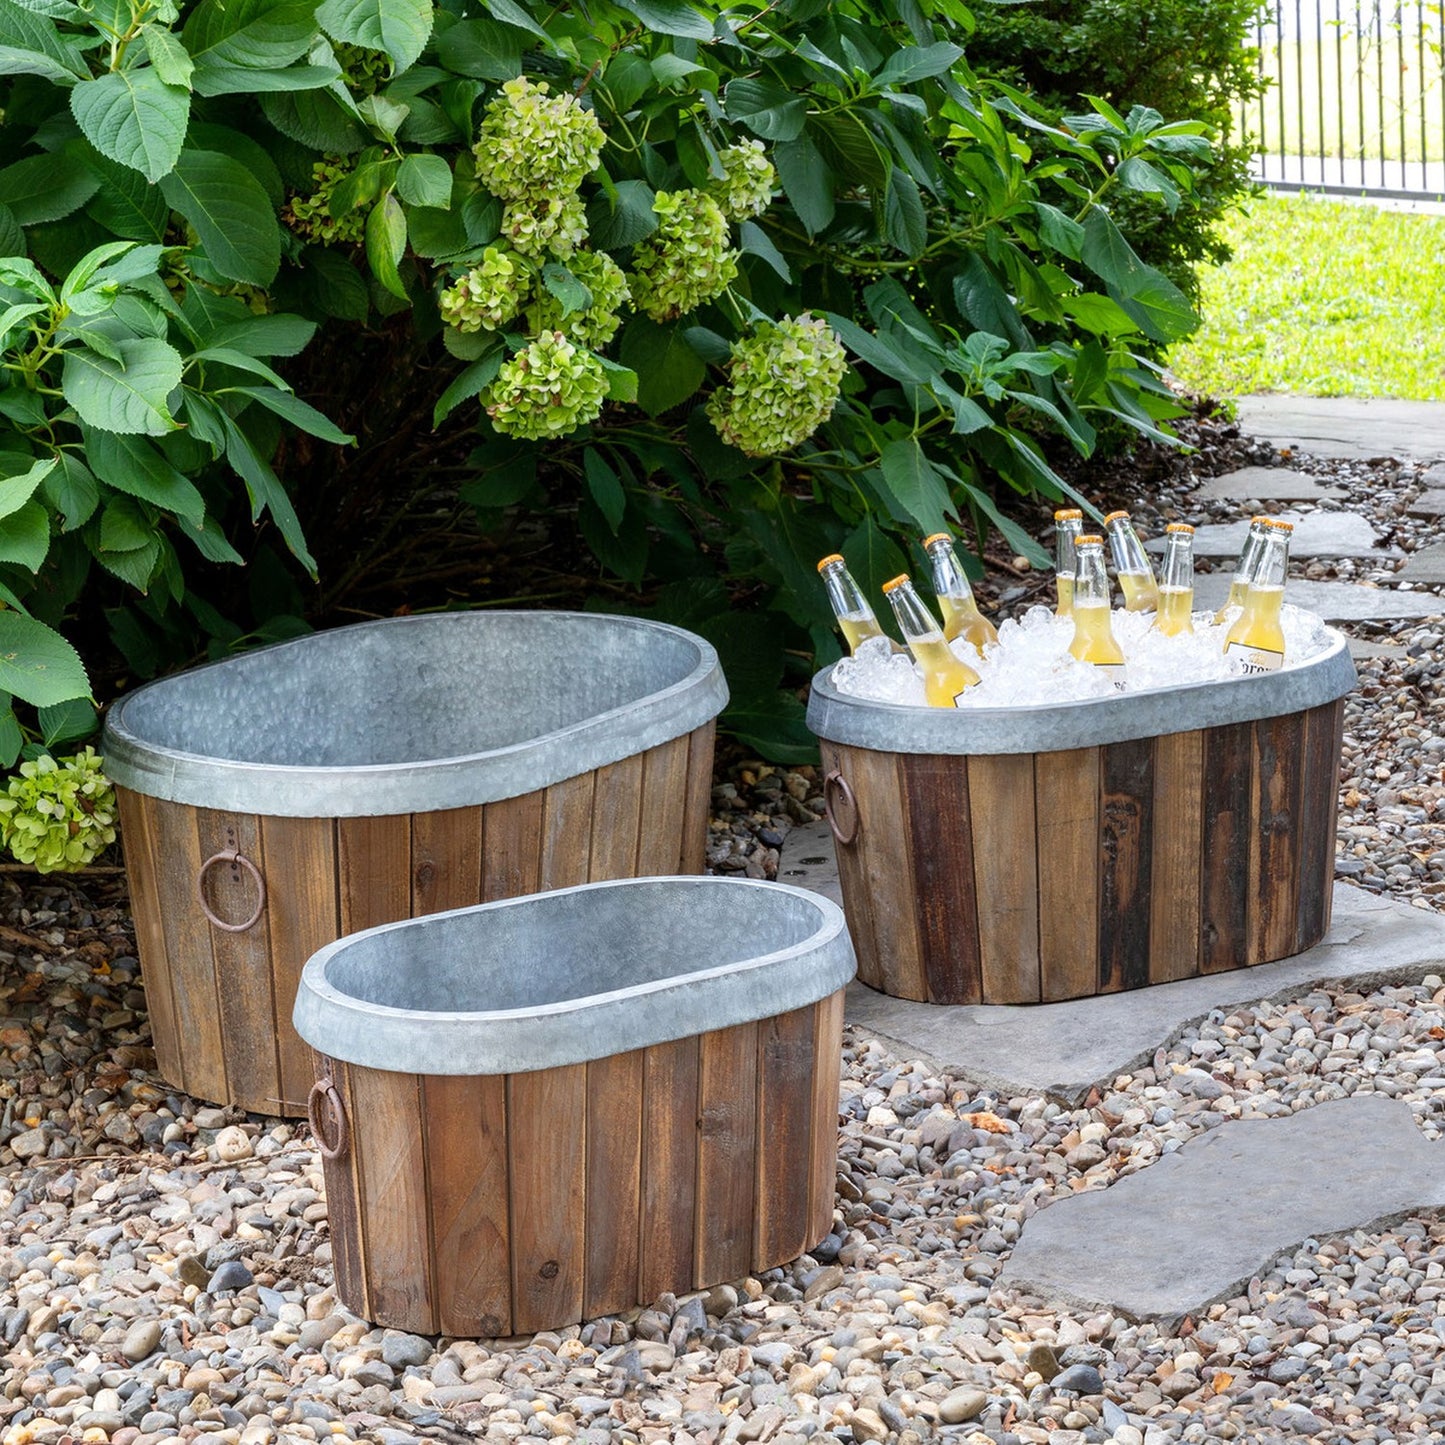 Park Hill Collection Garden Floral Galvanized Wooden Oval Tub Set of 3